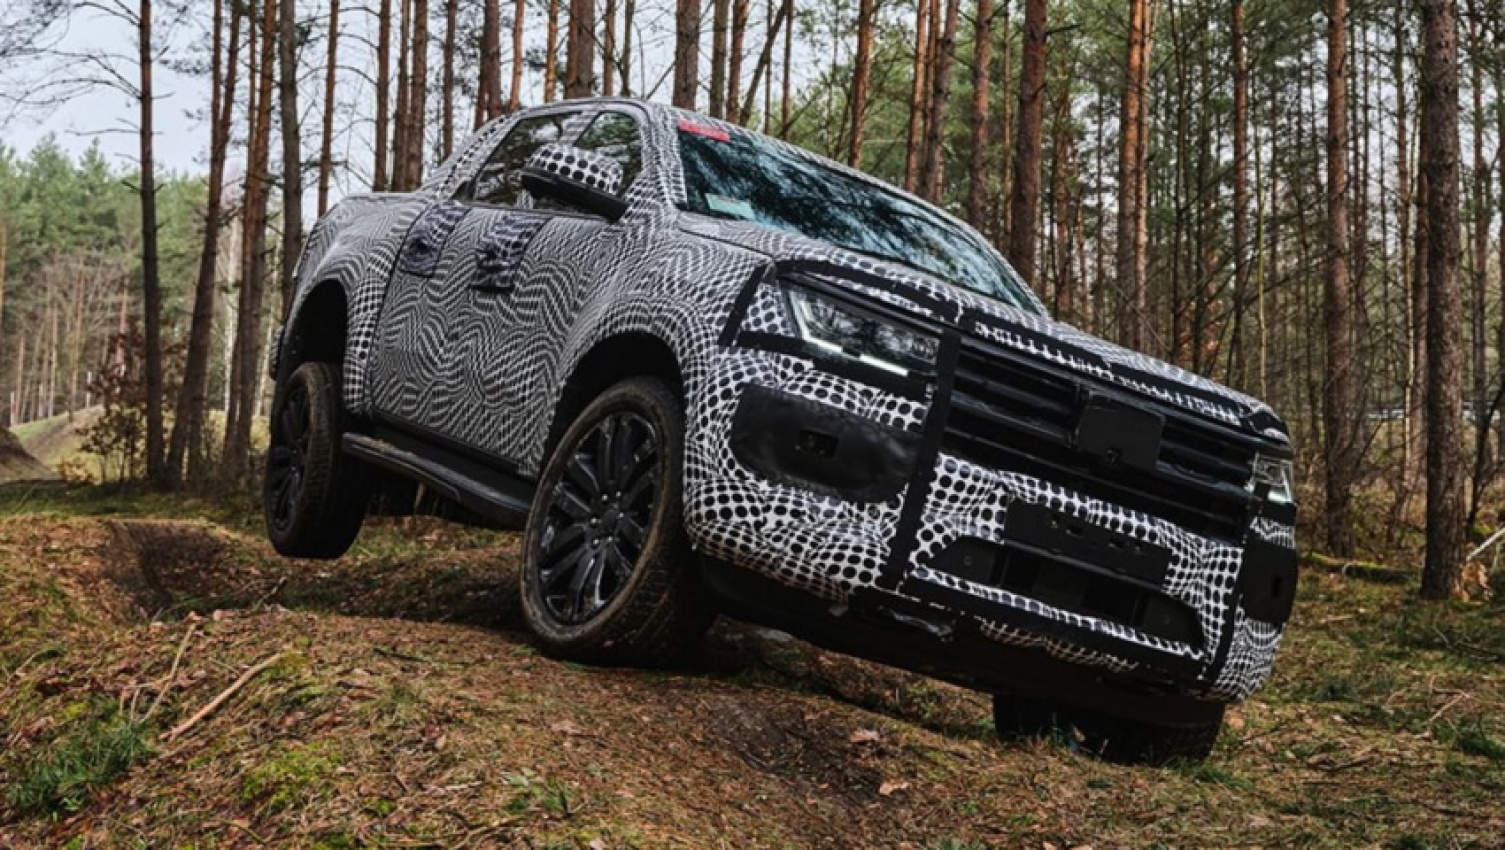 autos, cars, ford, amarok star! how the coming 2023 vw amarok may have helped ford improve the new ranger and everest, including their big v6 and more